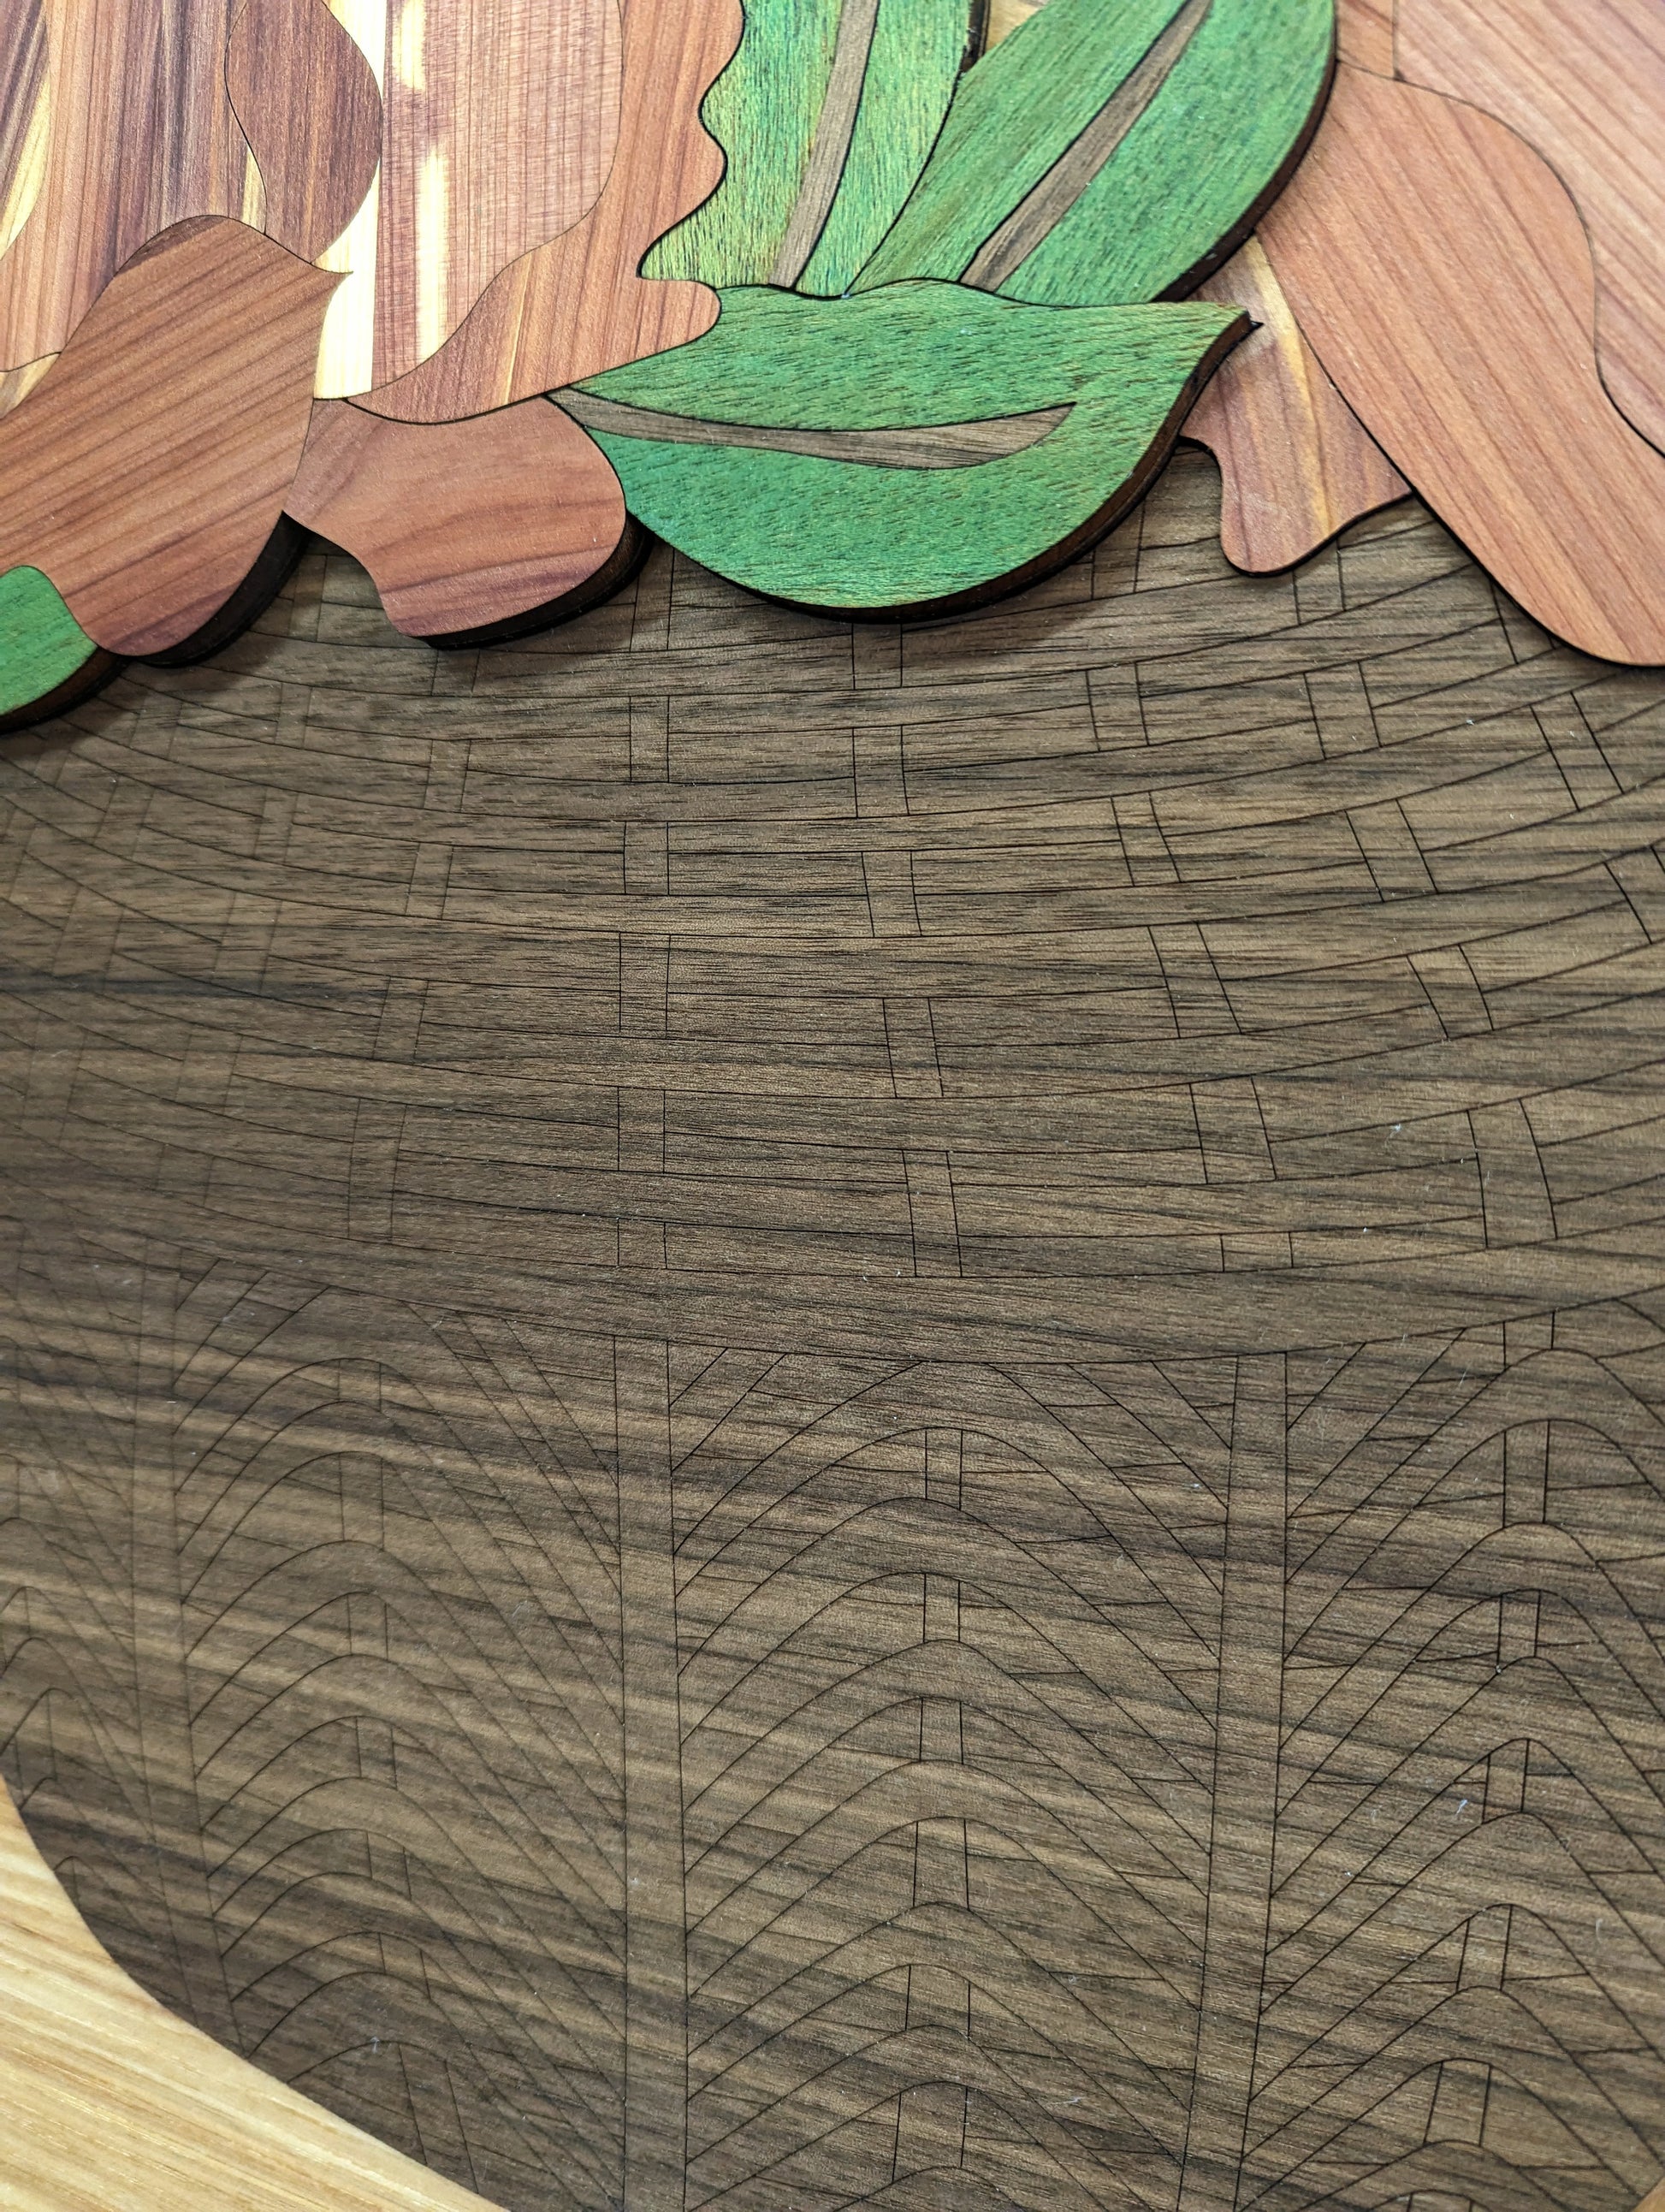 Closeup view of detail on the basket in the Laser Cut Wood Inlay wall art piece